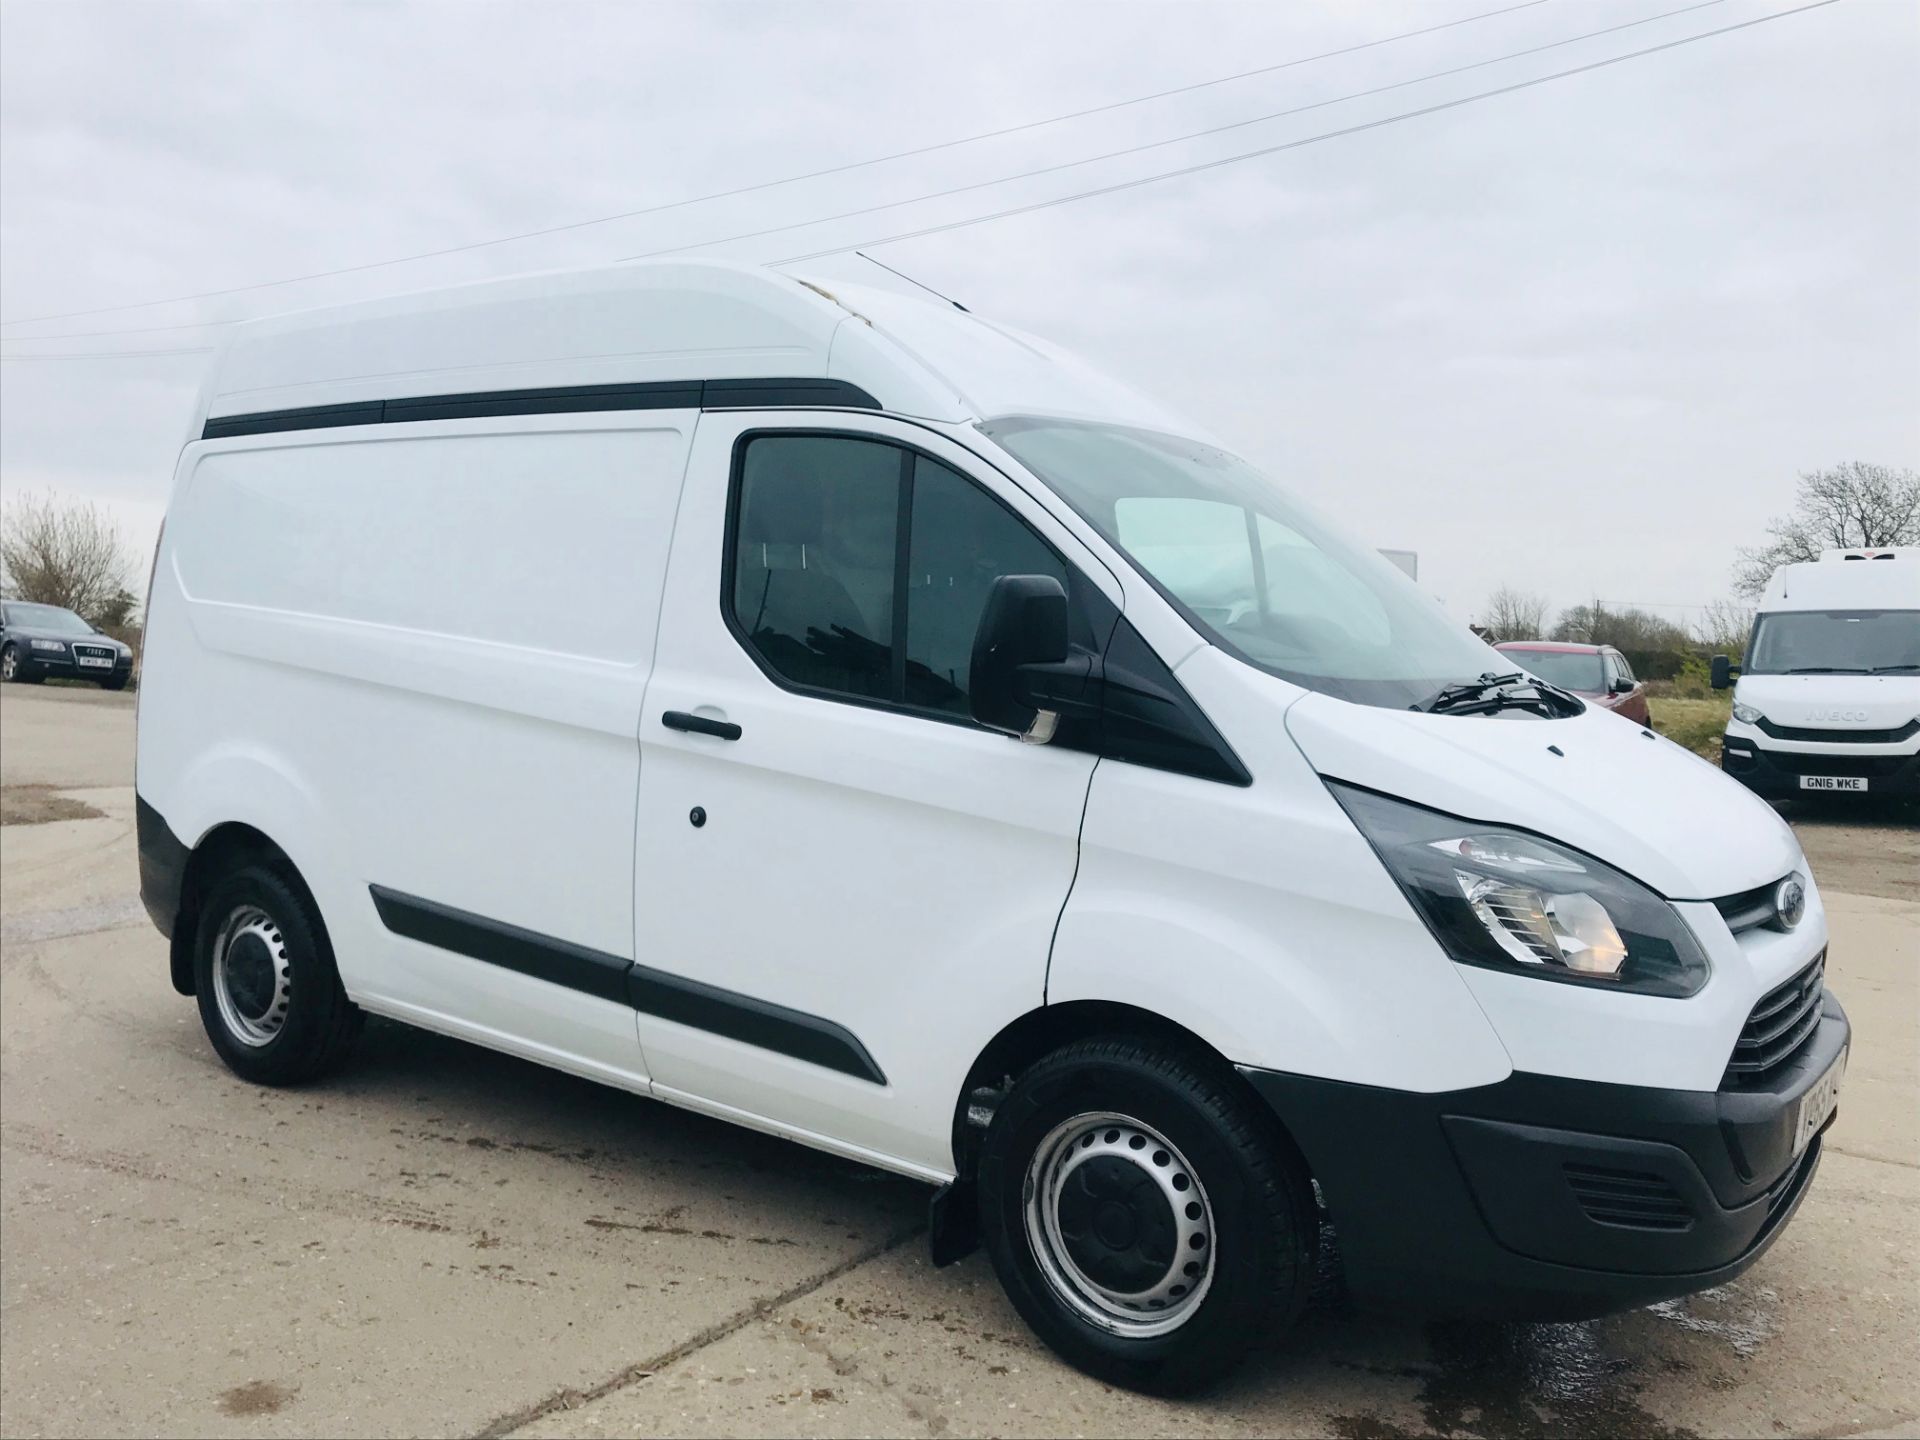 FORD TRANSIT CUSTOM ECO-TECH (2016 MODEL) HI TOP - 1 OWNER *AIR CON* *IDEADL CAMPER CONVERSION* - Image 10 of 32